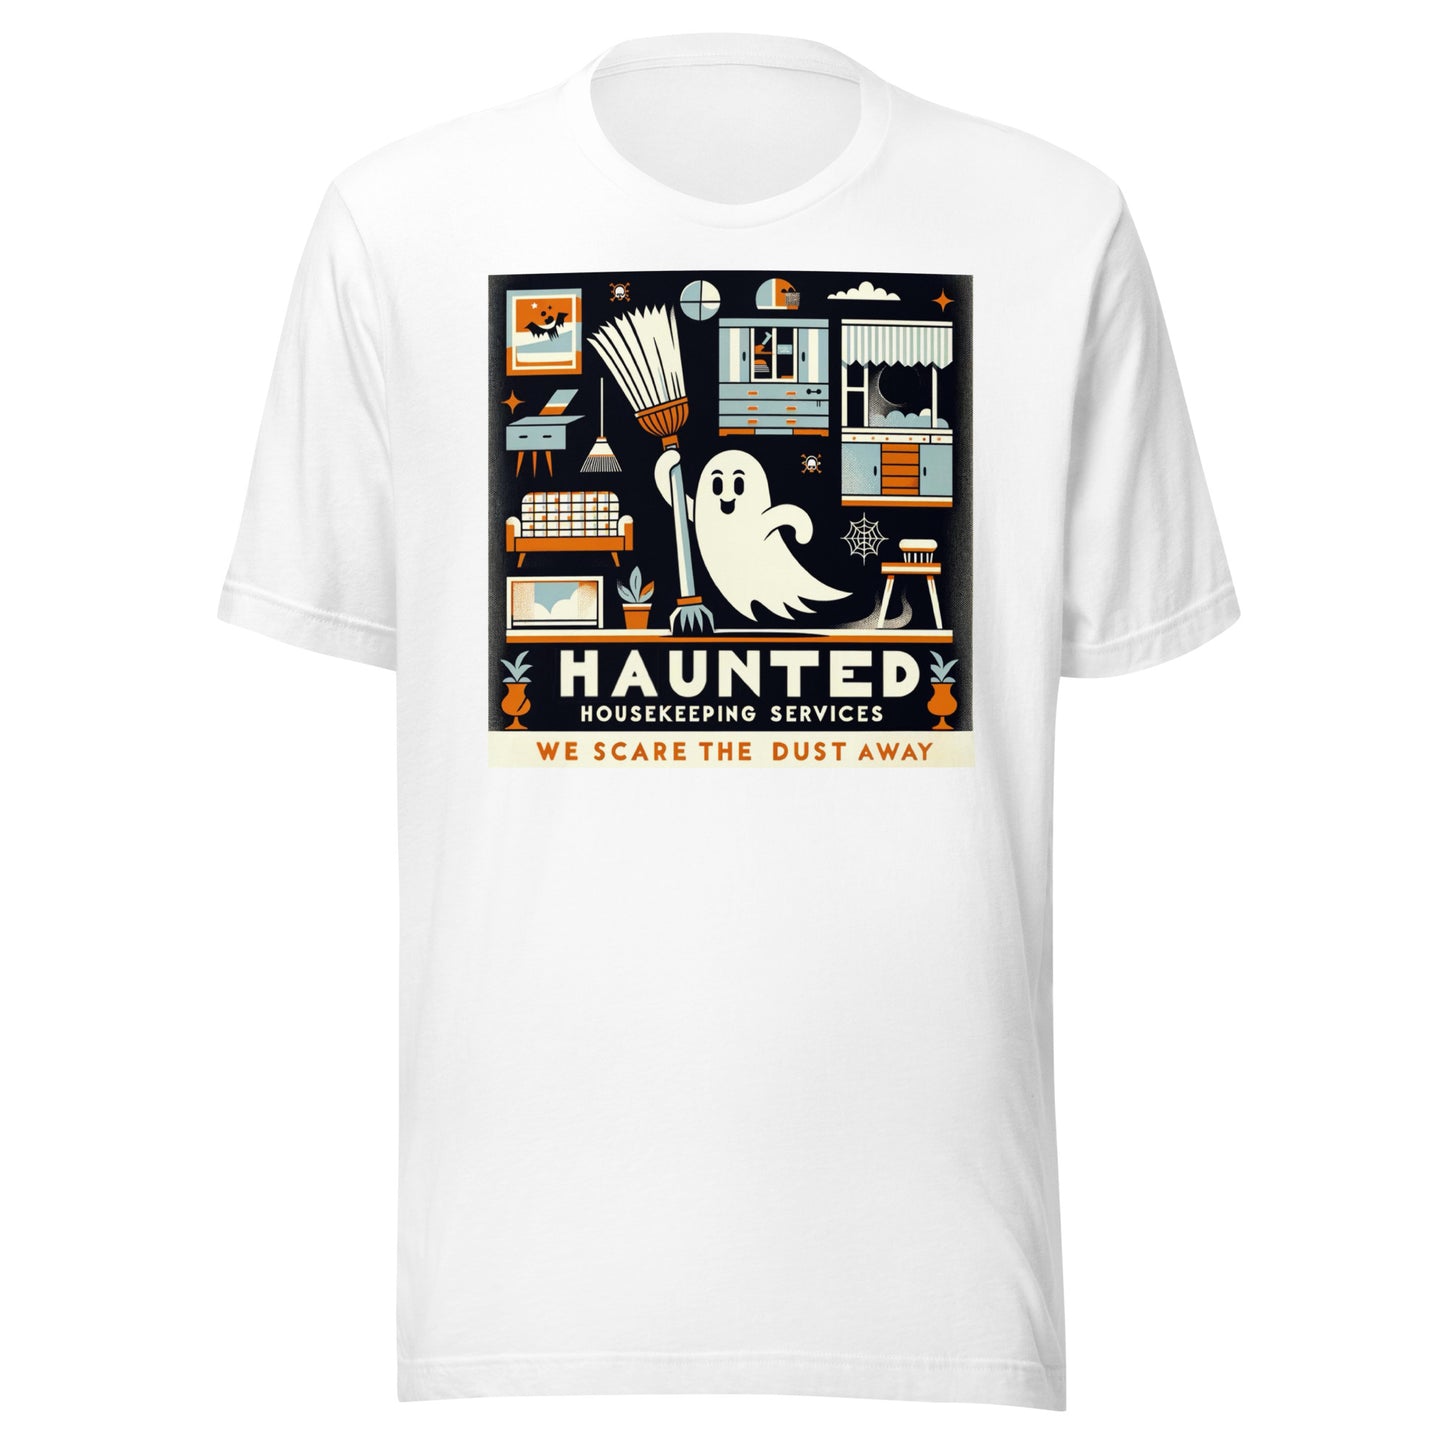 Haunted Housekeeping Services - We Scare the Dust Away Unisex t-shirt